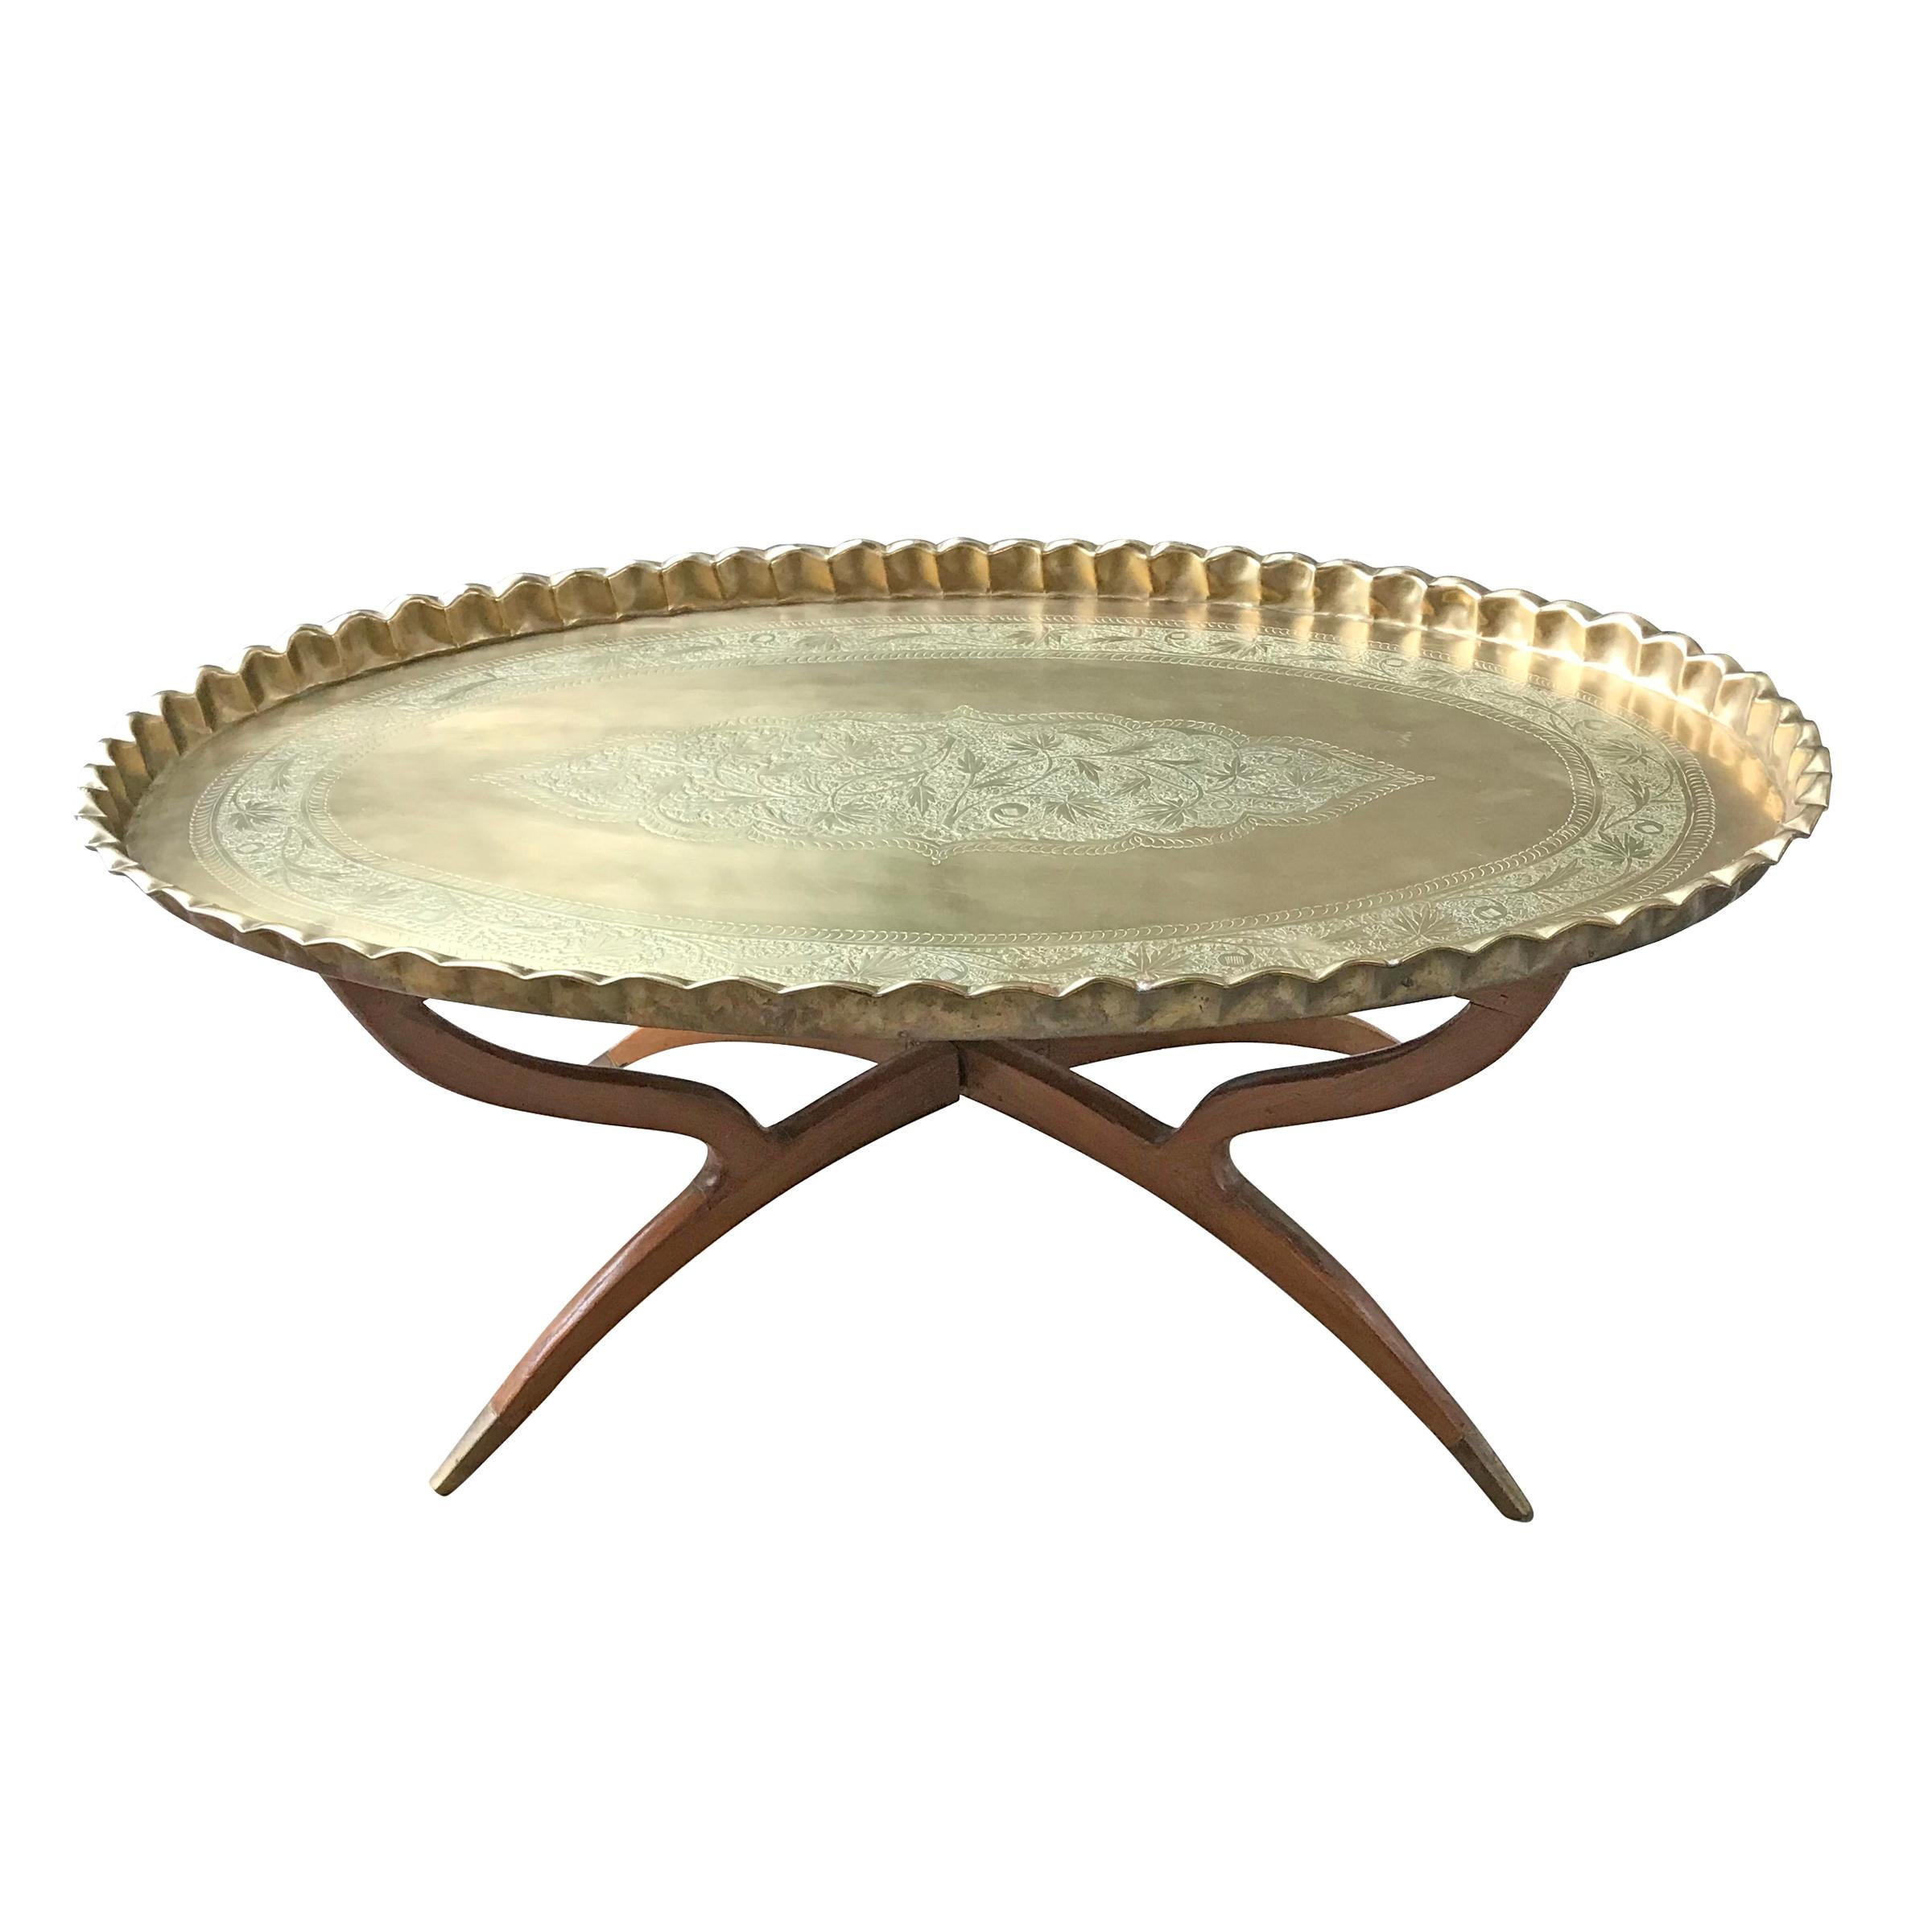 A wonderful mid-20th century Moroccan tea table with a large heavy brass oval tray with hand-chased floral decorations and ruffled rim, mounted on a folding four-legged mahogany stand with brass feet.